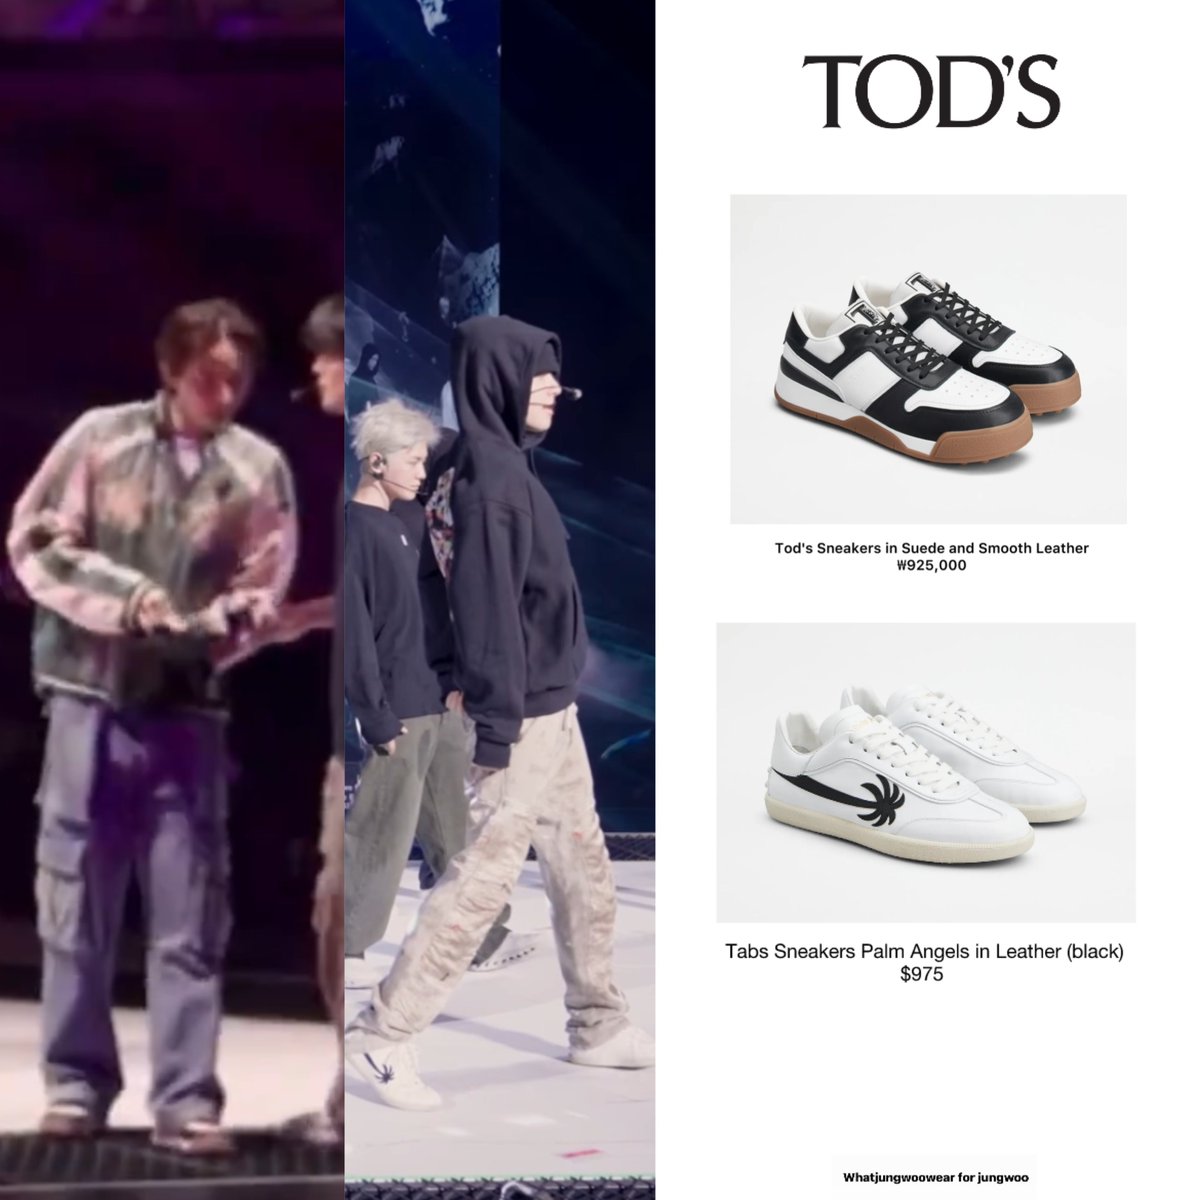 #JUNGWOO’s wear @Tods Tod's Sneakers in Suede and Smooth Leather ₩925,000 Tabs Sneakers Palm Angels in Leather (black) $975 #JUNGWOOxTods